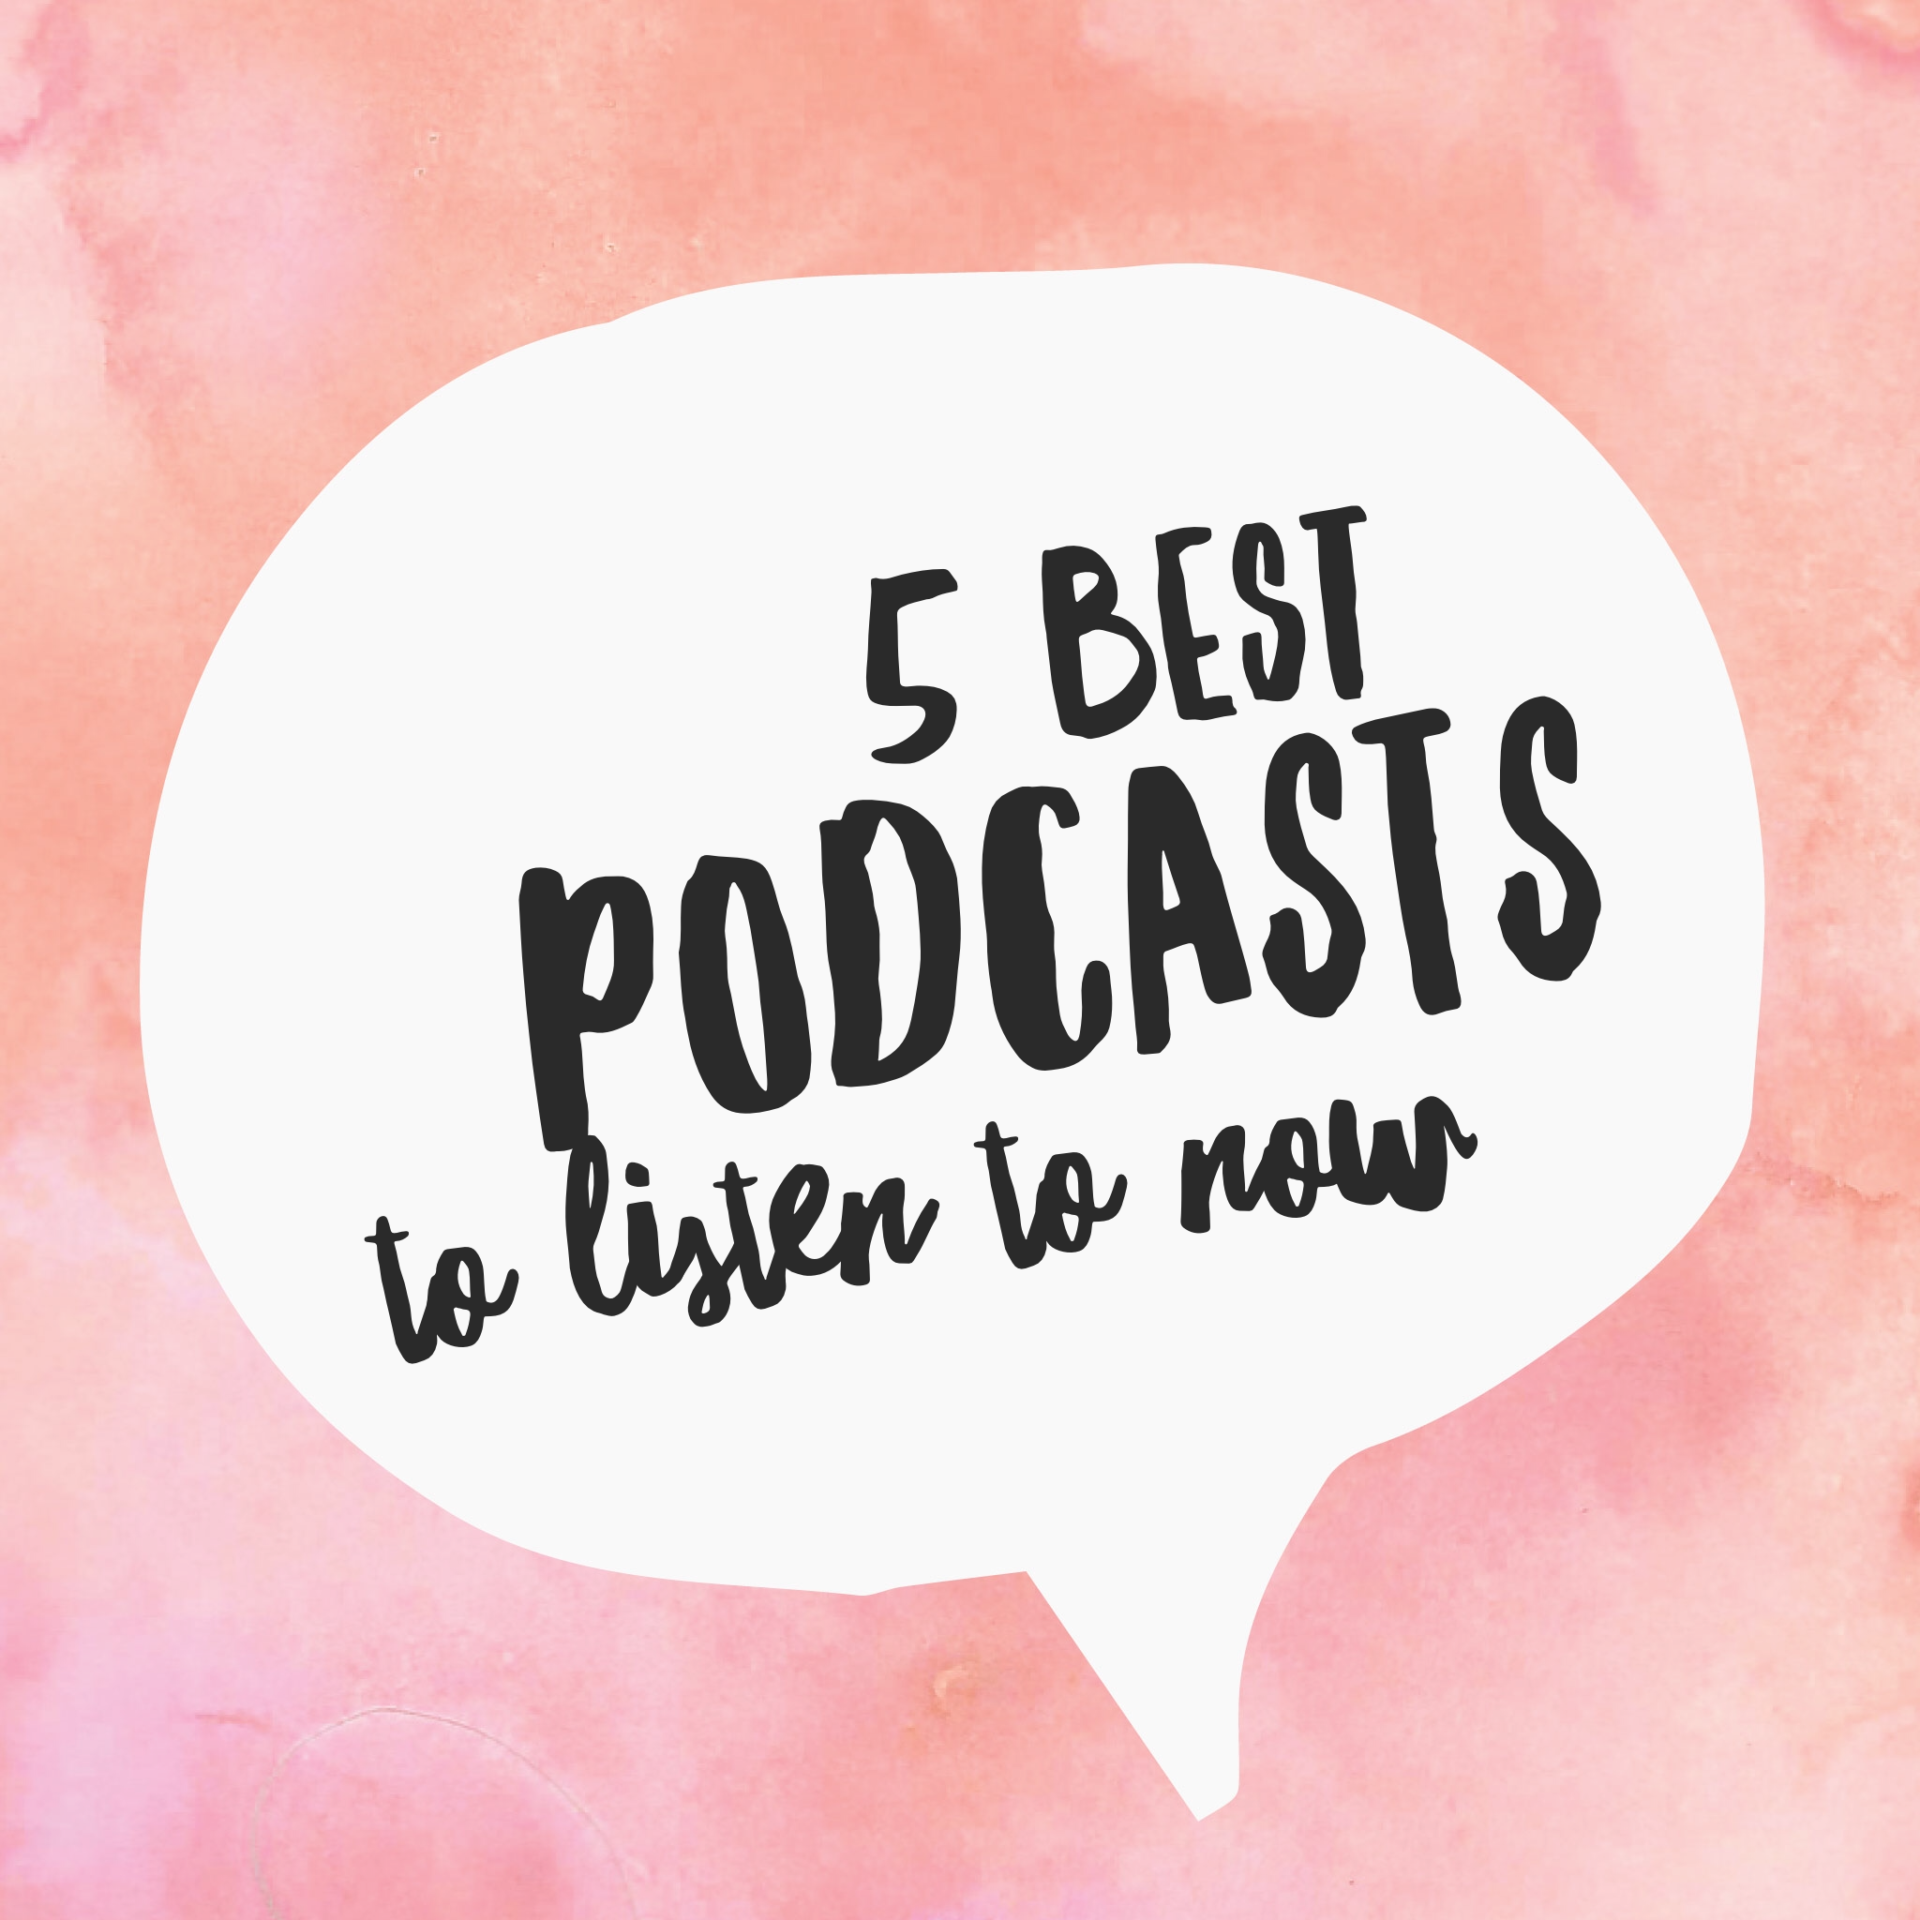 5 Best Podcasts To Listen To Right Now!